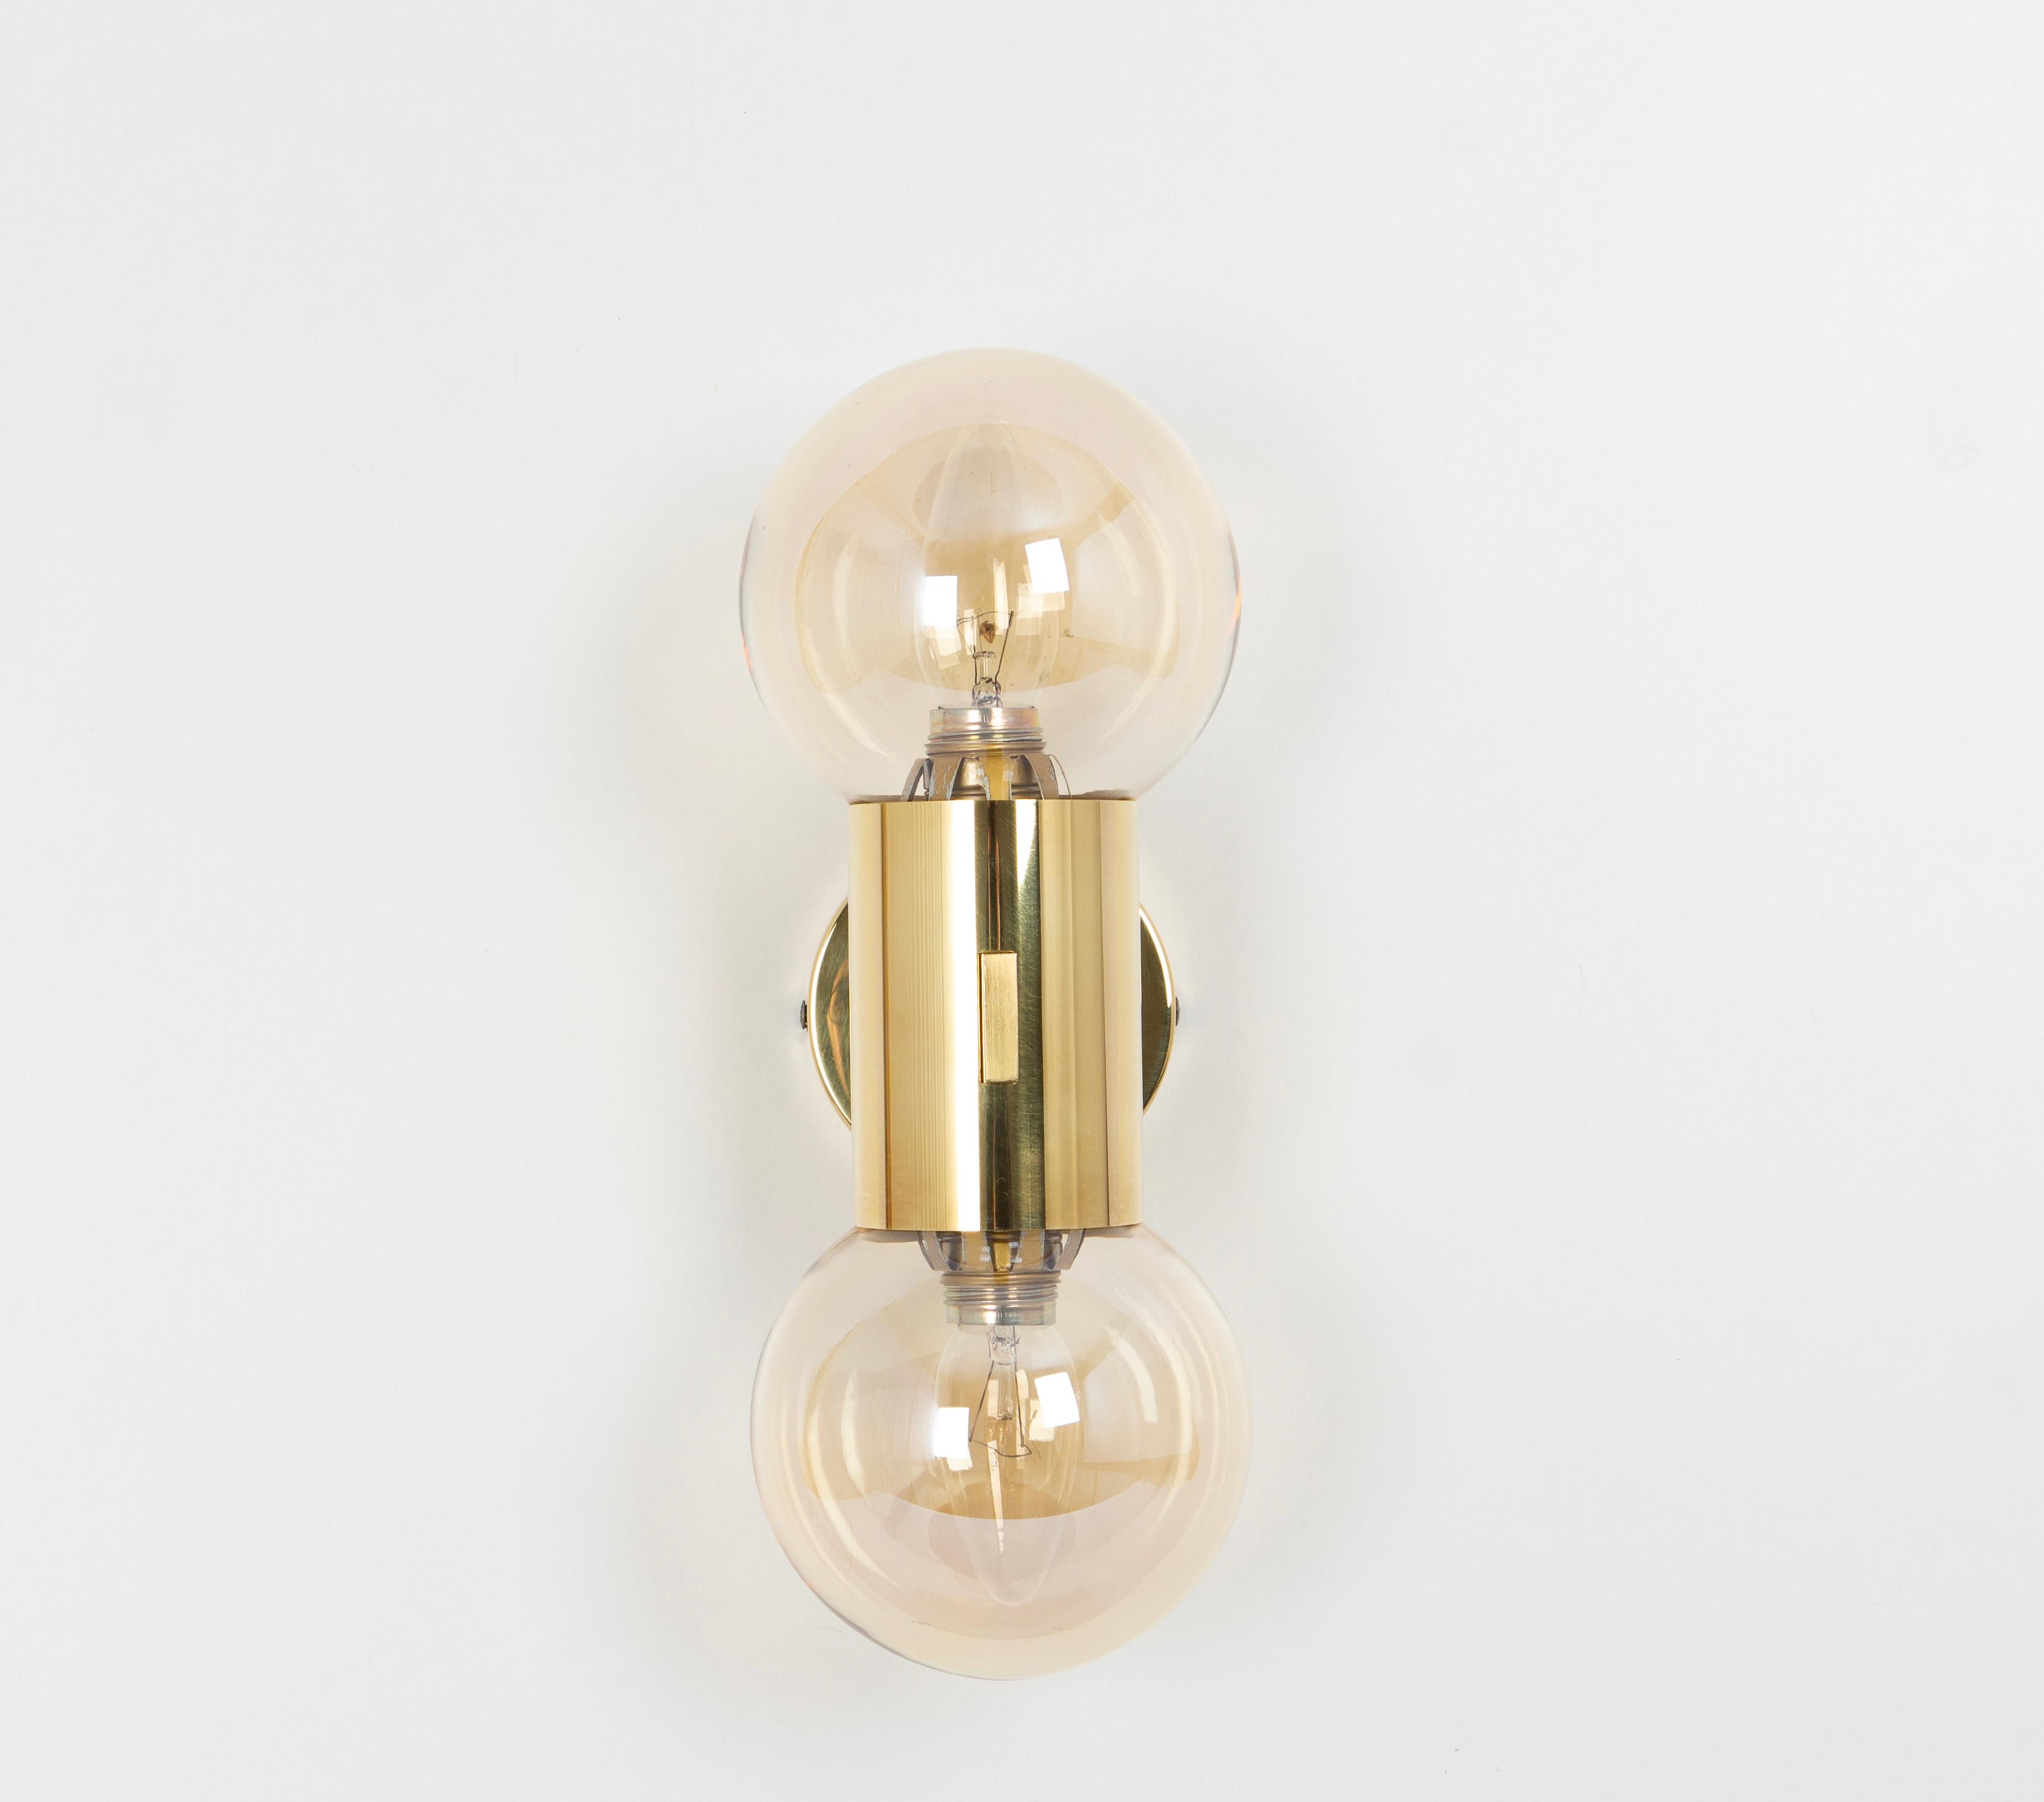 Pair of wall sconces in the manner of Sciolari, Made in Germany, 1970s.
Each sconce is composed of 2 smoked glasses with a brass base.

High quality and in very good condition. Cleaned, well-wired, and ready to use. 
Each sconce requires 2 x E14